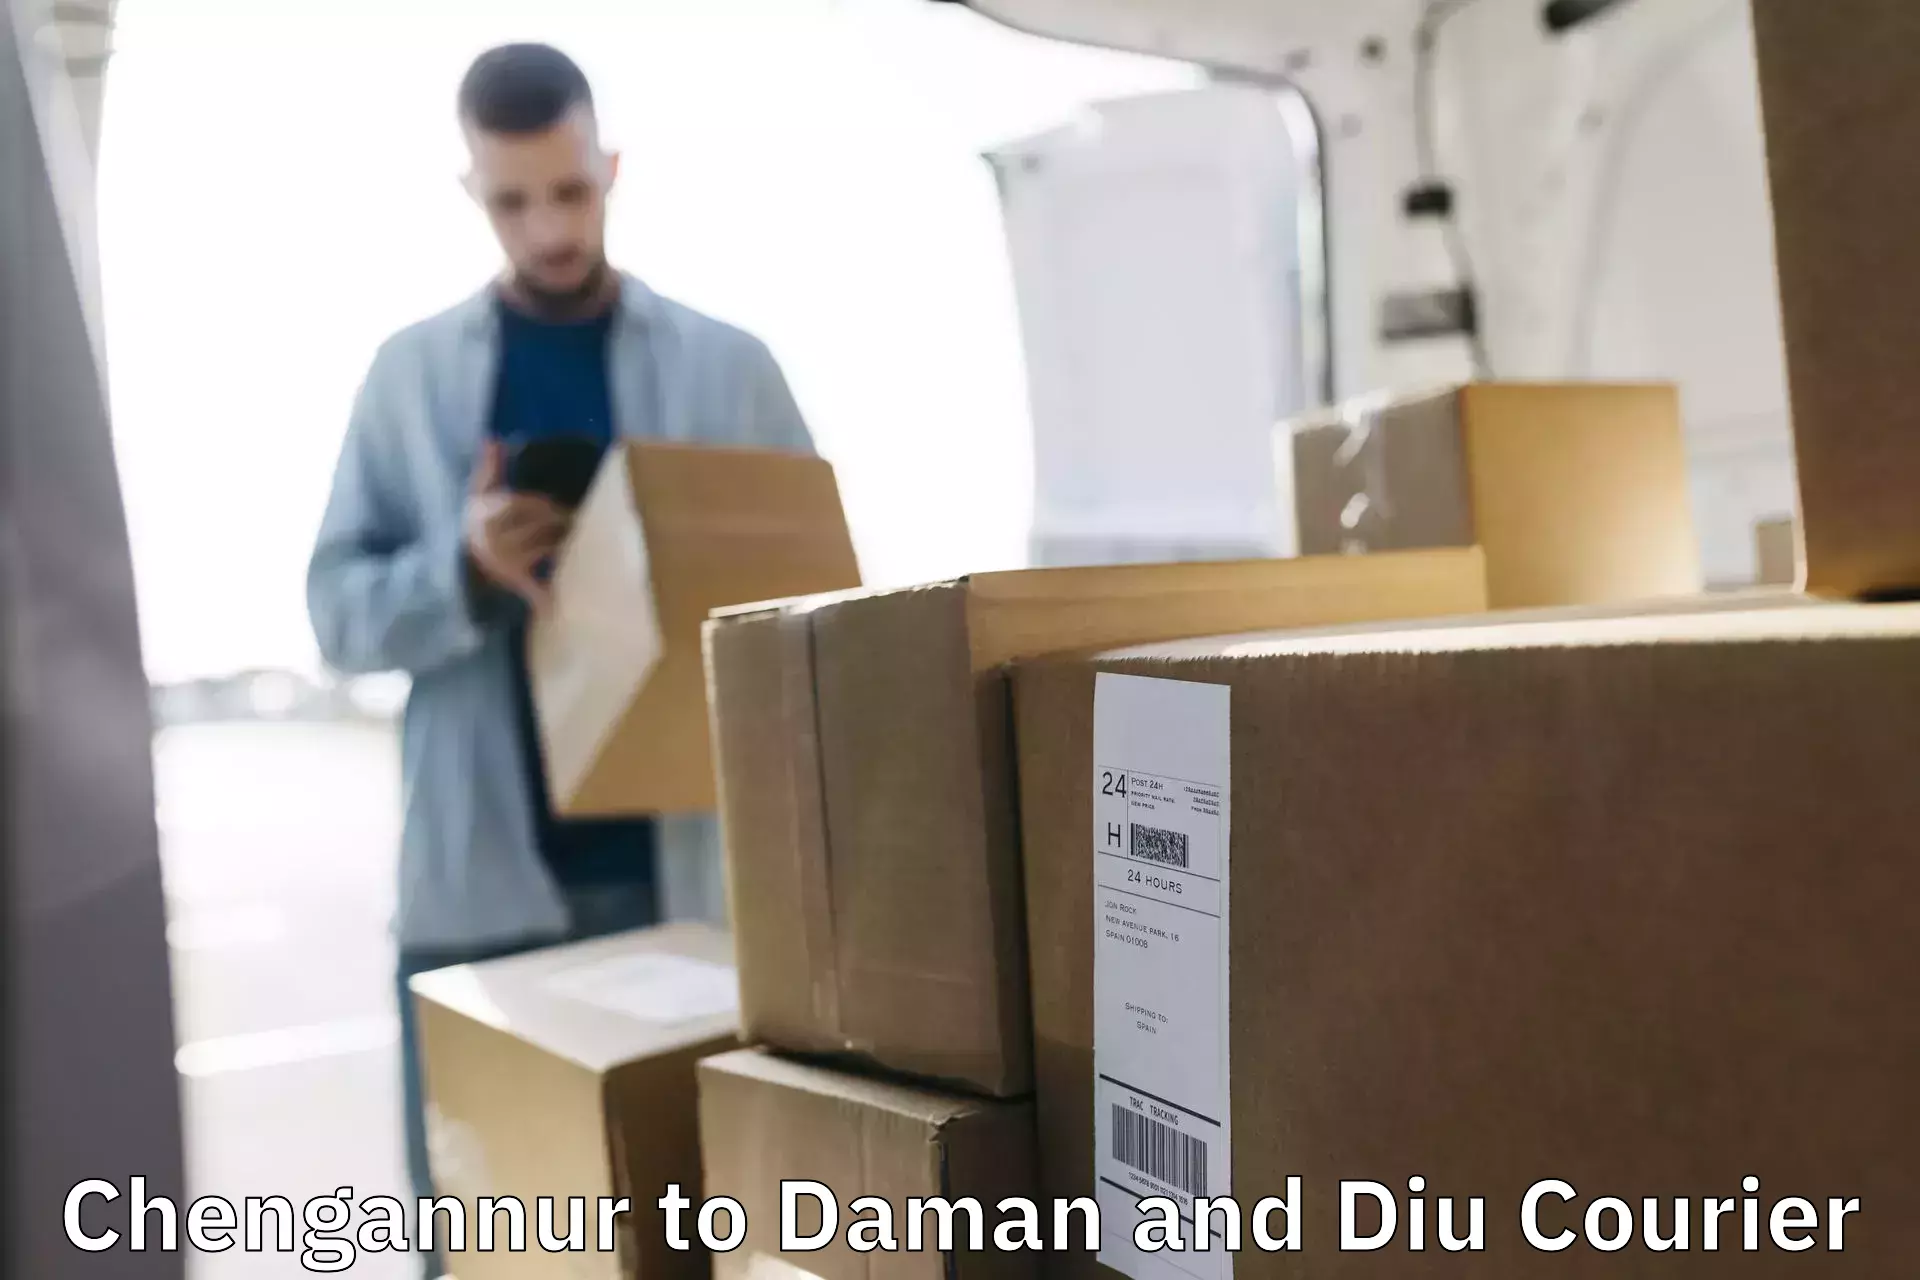 Overnight delivery services Chengannur to Daman and Diu